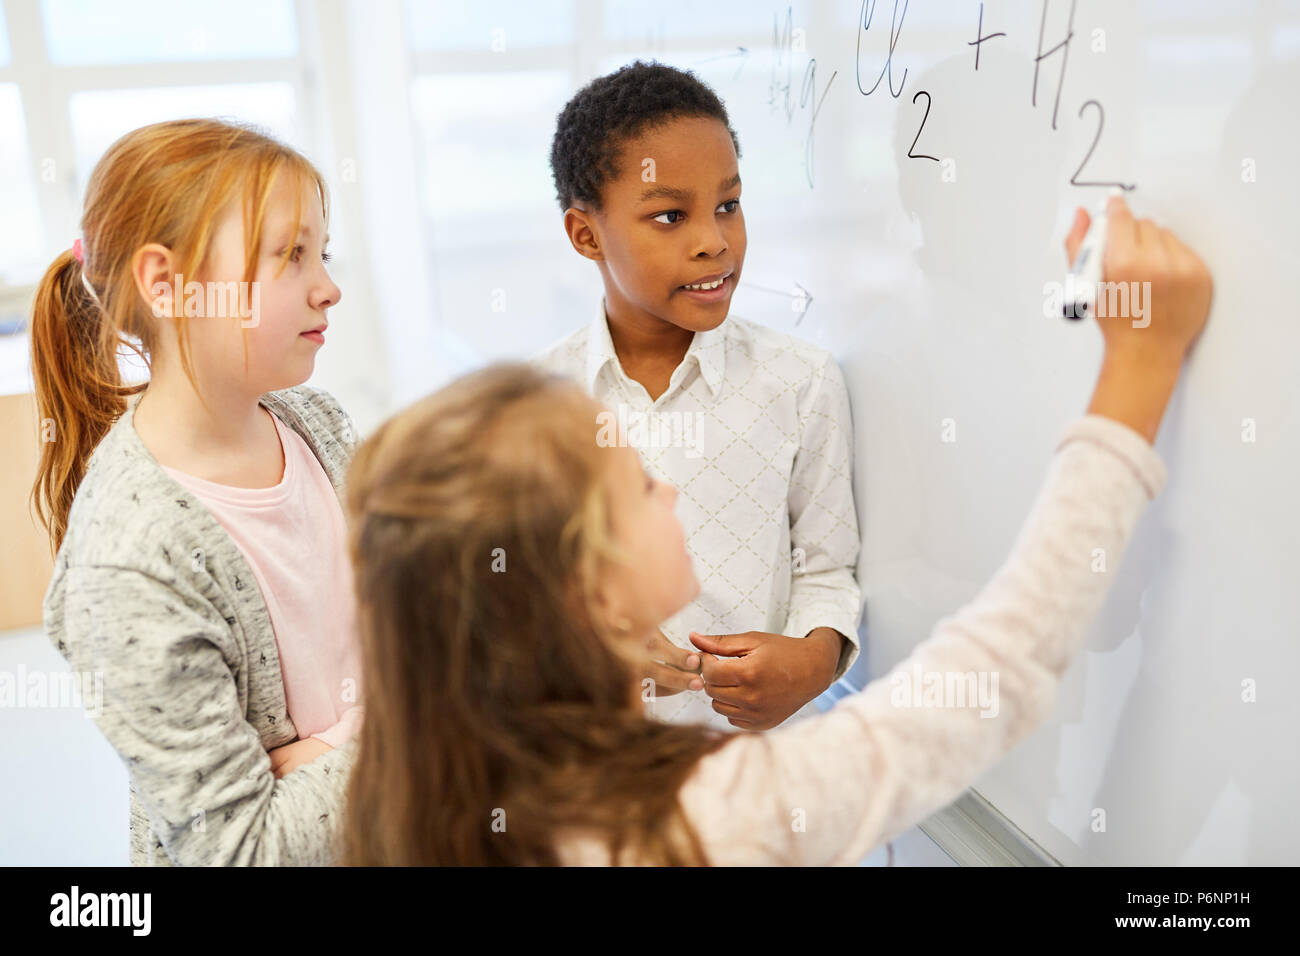 Group of kids in math lesson calculates a task on the blackboard Stock Photo